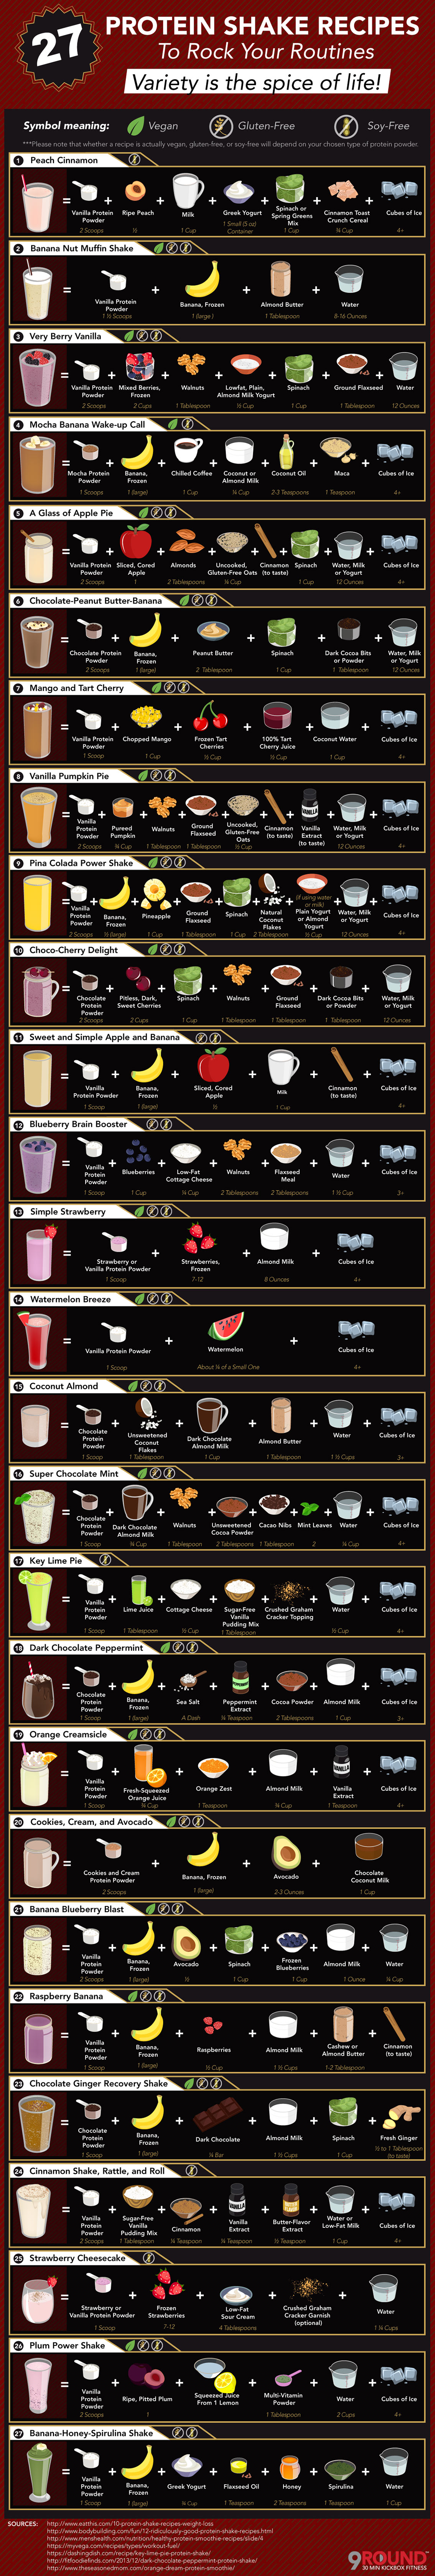 Gluten-Free and Soy-Free Protein Shake Recipes - Food Infographic